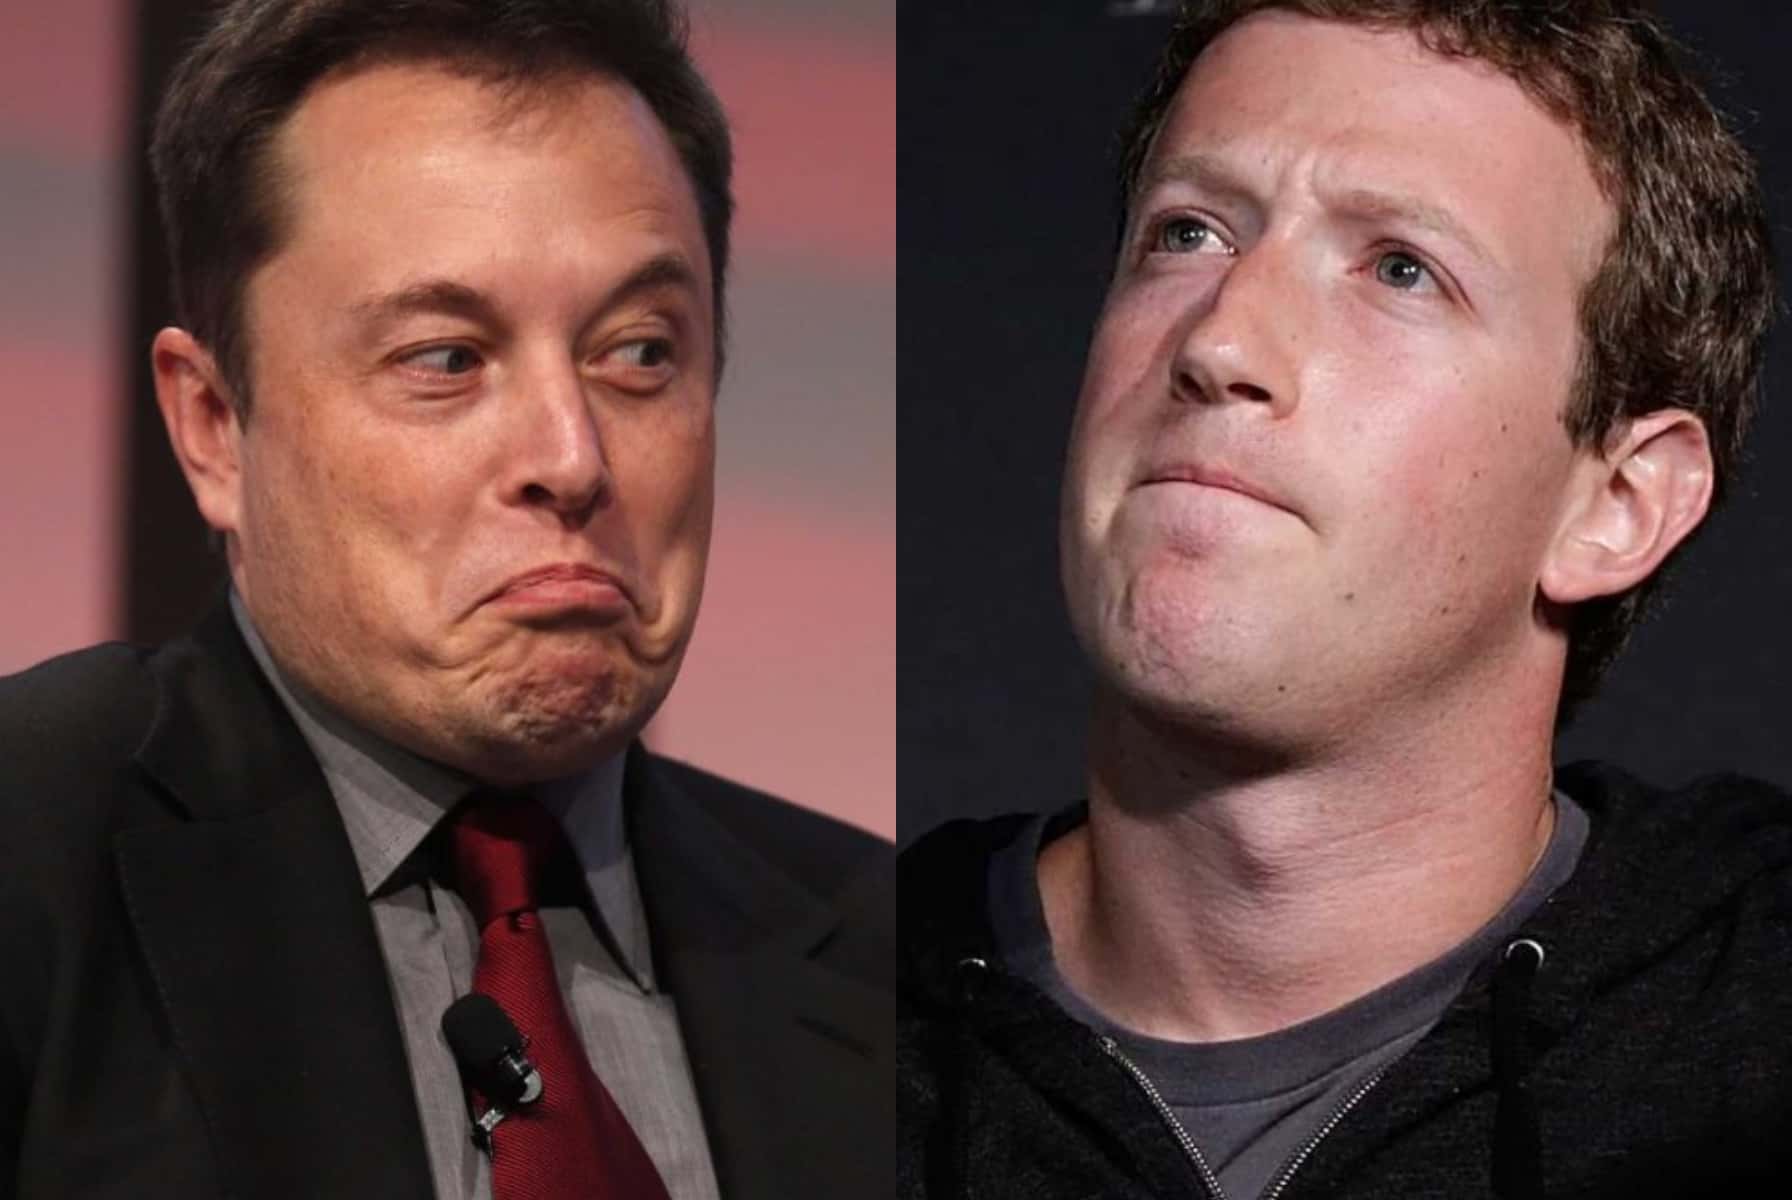 <p>In 2016, Musk was tasked by Mark Zuckerberg with a very important mission: to transport the first satellite Facebook had ever put into orbit. The satellite would provide Internet to the developing world, but with an anomaly in the launch pad, the rocket exploded and destroyed $200 million in cargo.</p>